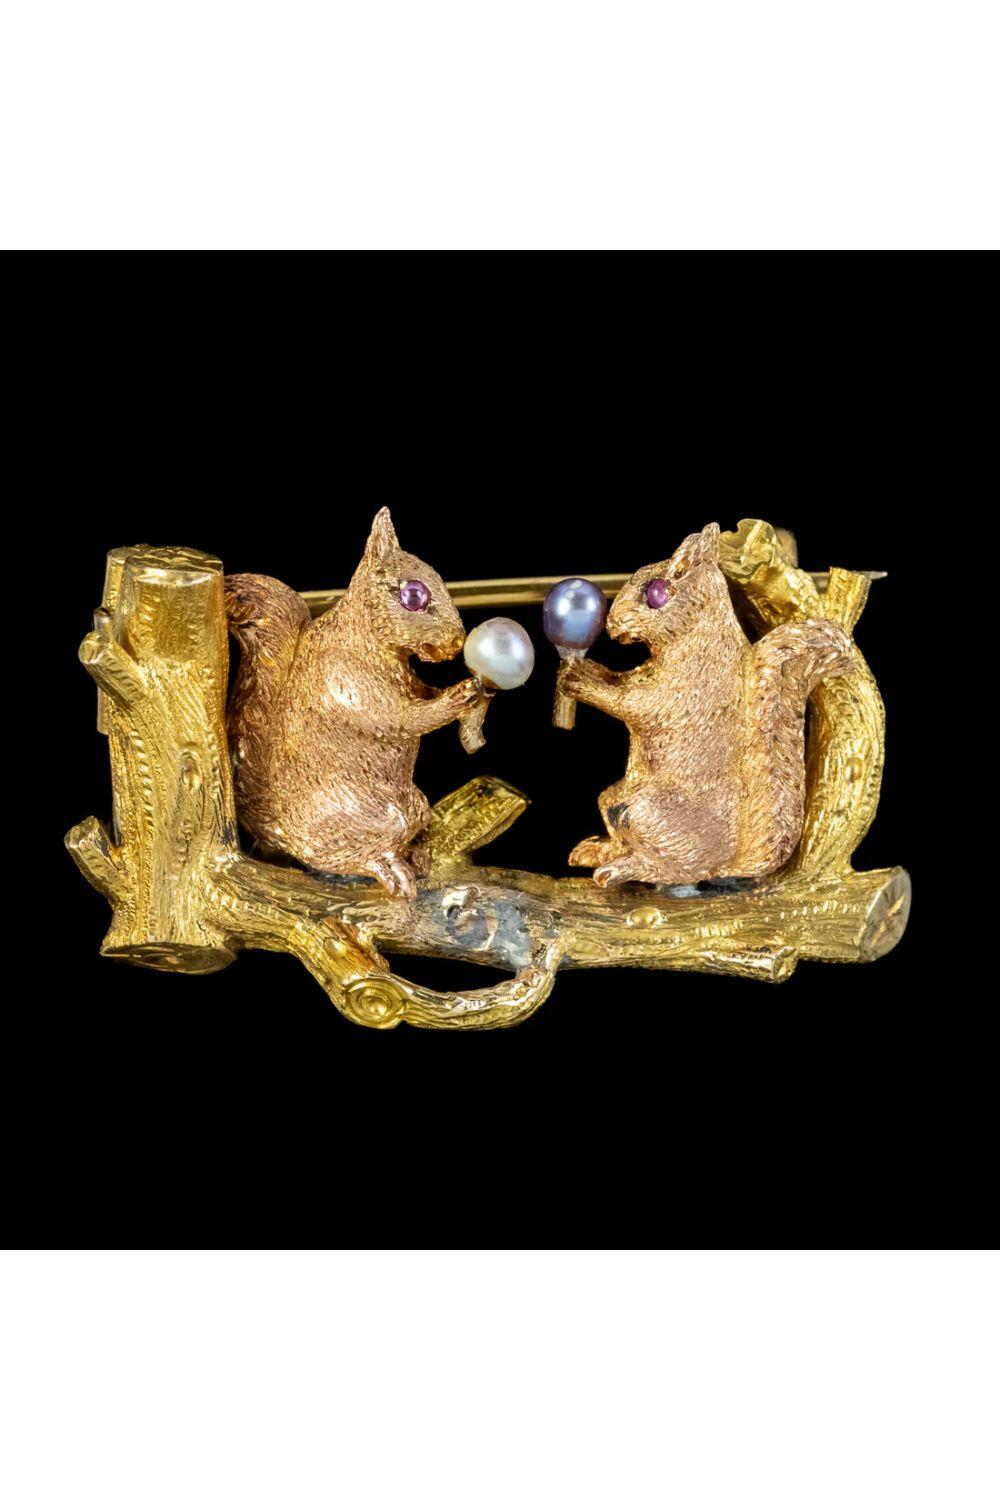 A delightful antique Victorian brooch depicting two squirrels with cabochon ruby eyes perched on a tree branch nibbling happily on white and silver pearl acorns. It’s all solid 18ct yellow gold with intricate fur and wood detailing. 

It’s remained